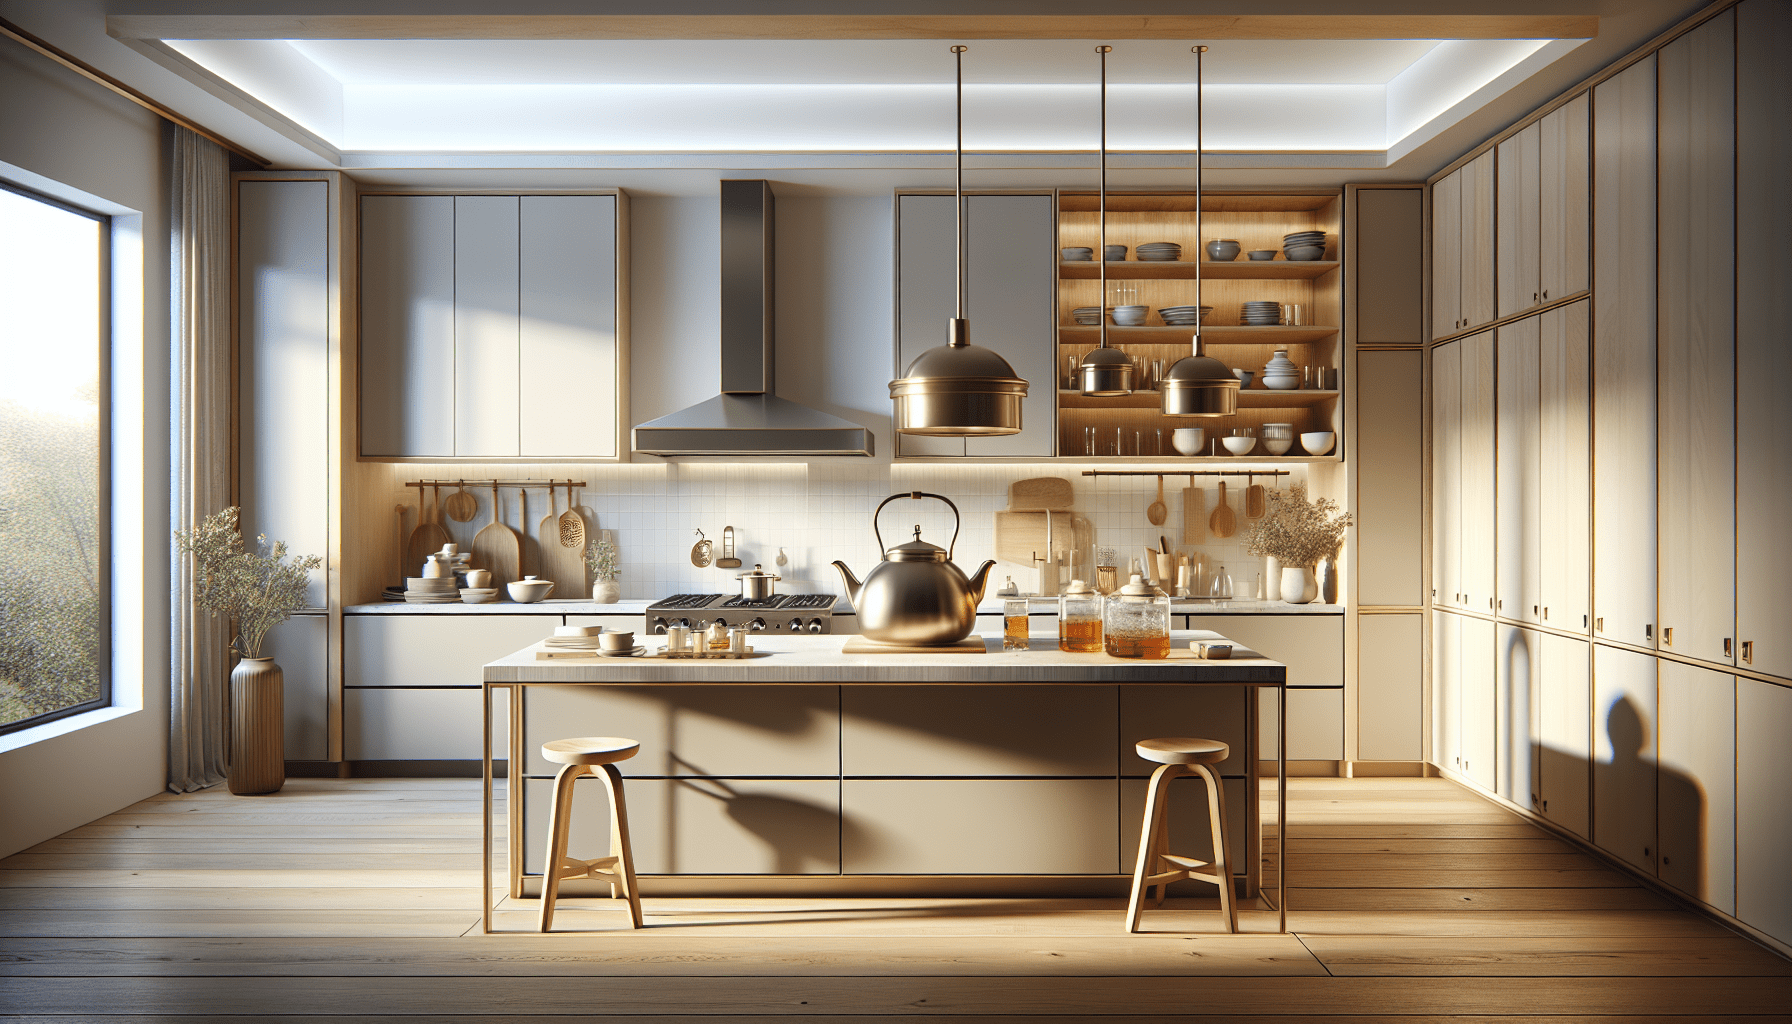 What Is The Golden Rule Of Kitchen Design?